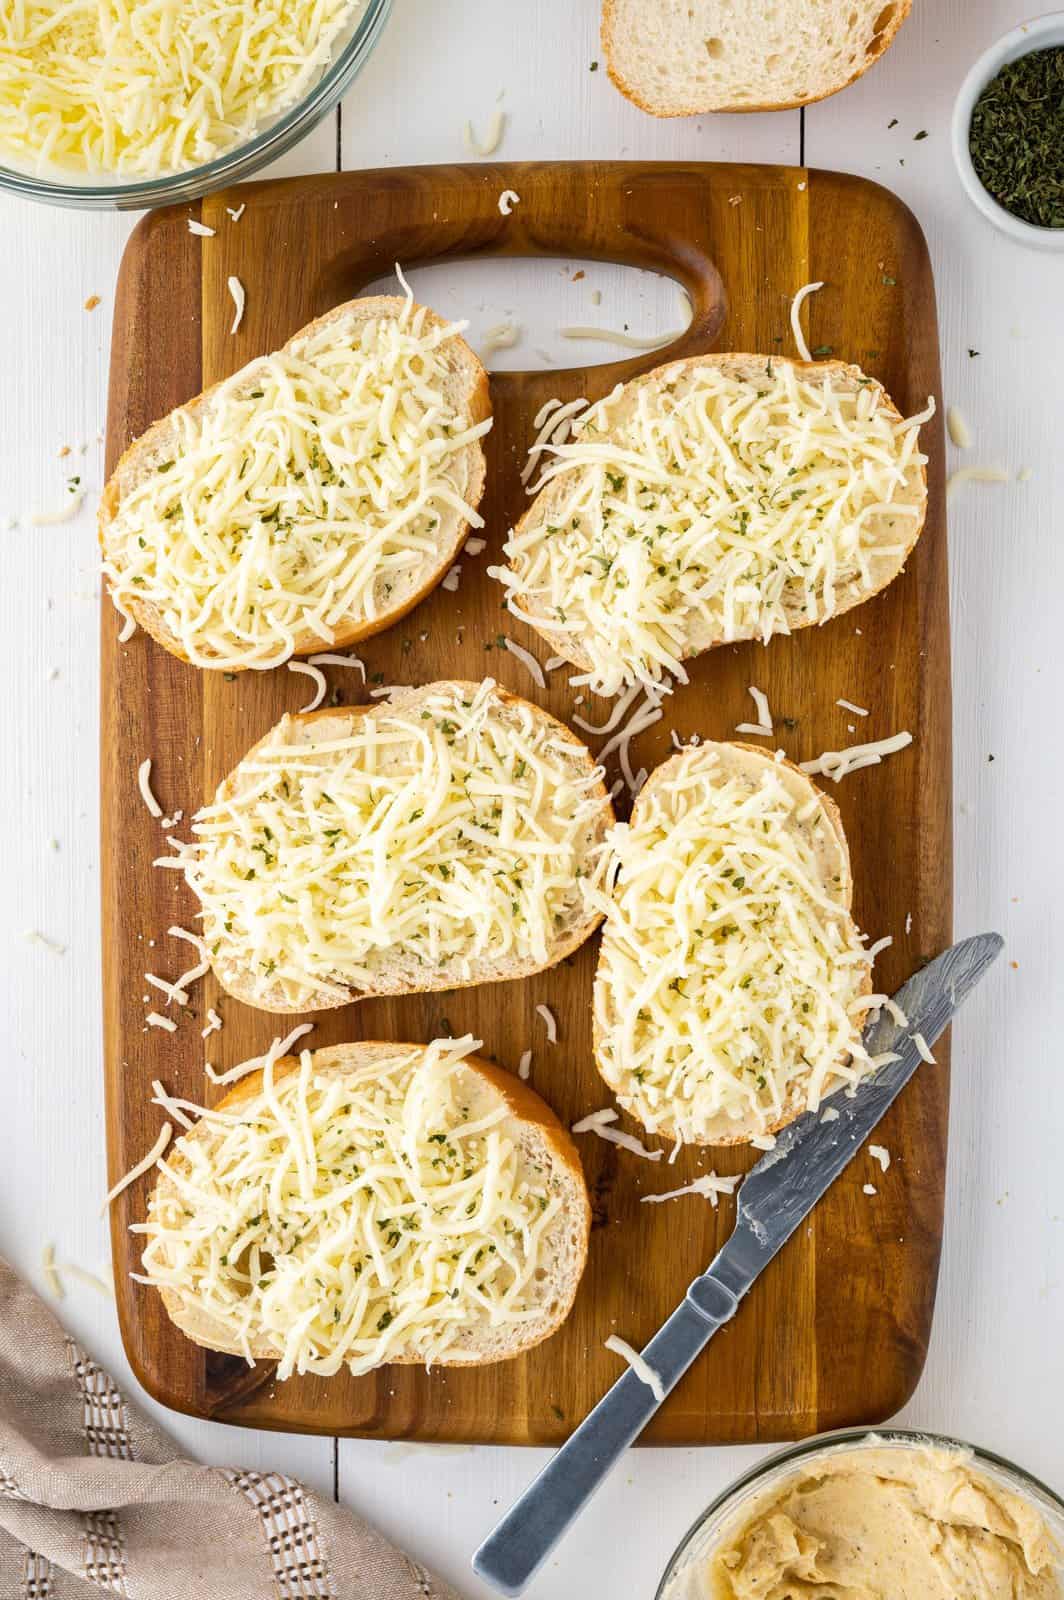 Five pieces of bread with garlic butter and mozzarella cheese sprinkled on top. 